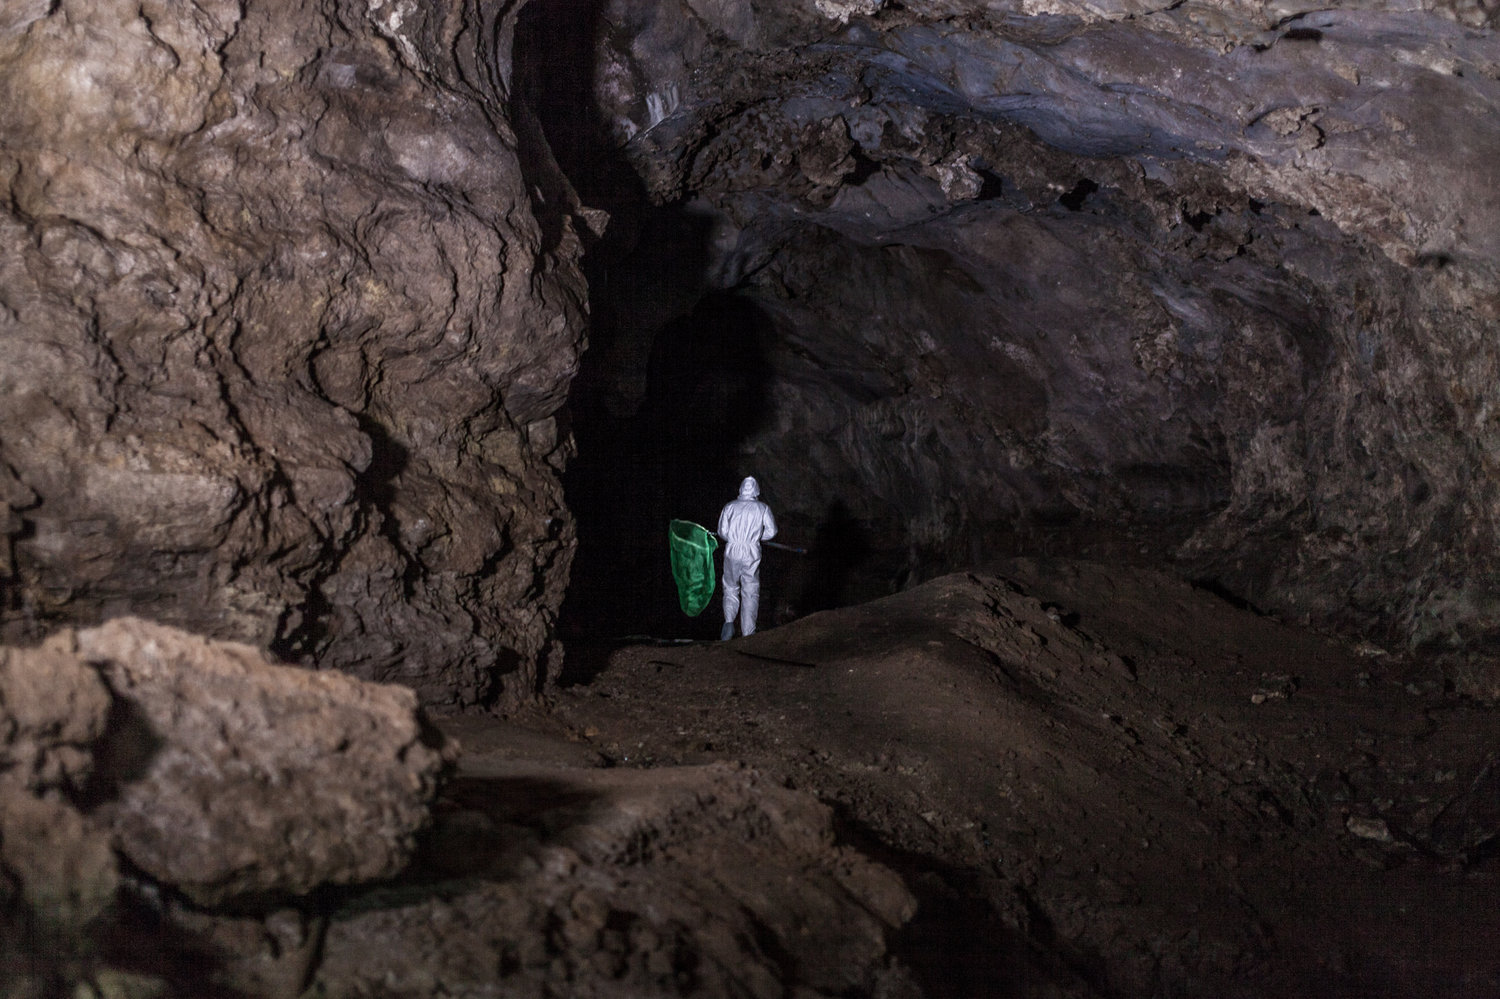 A member of the EcoHealth Alliance field team enters a cave in China